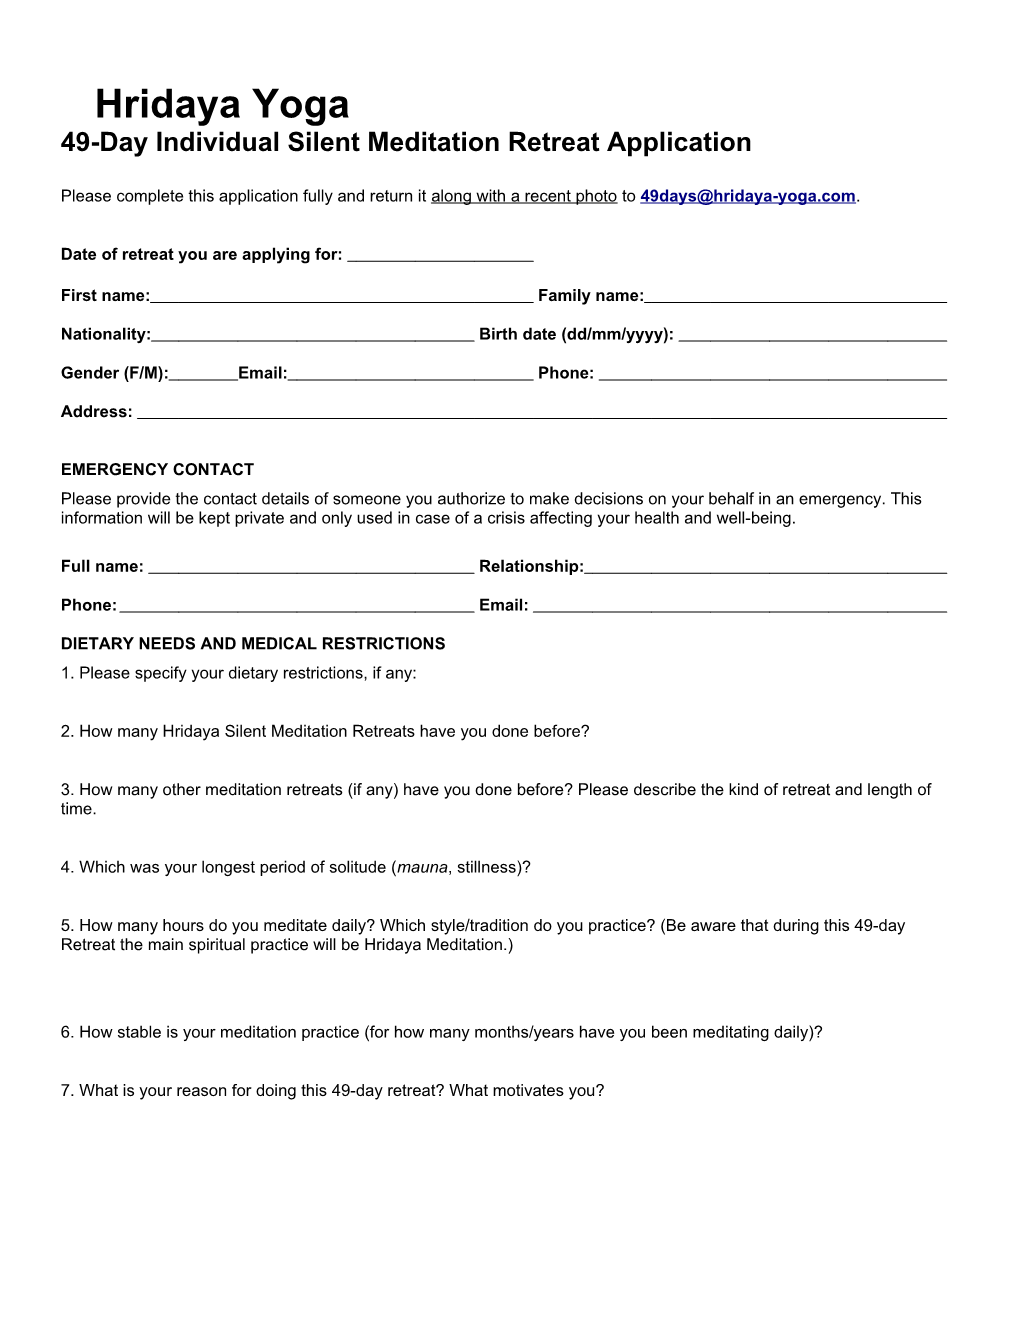 Please Complete This Application Fully and Return It Along with a Recent Photo to